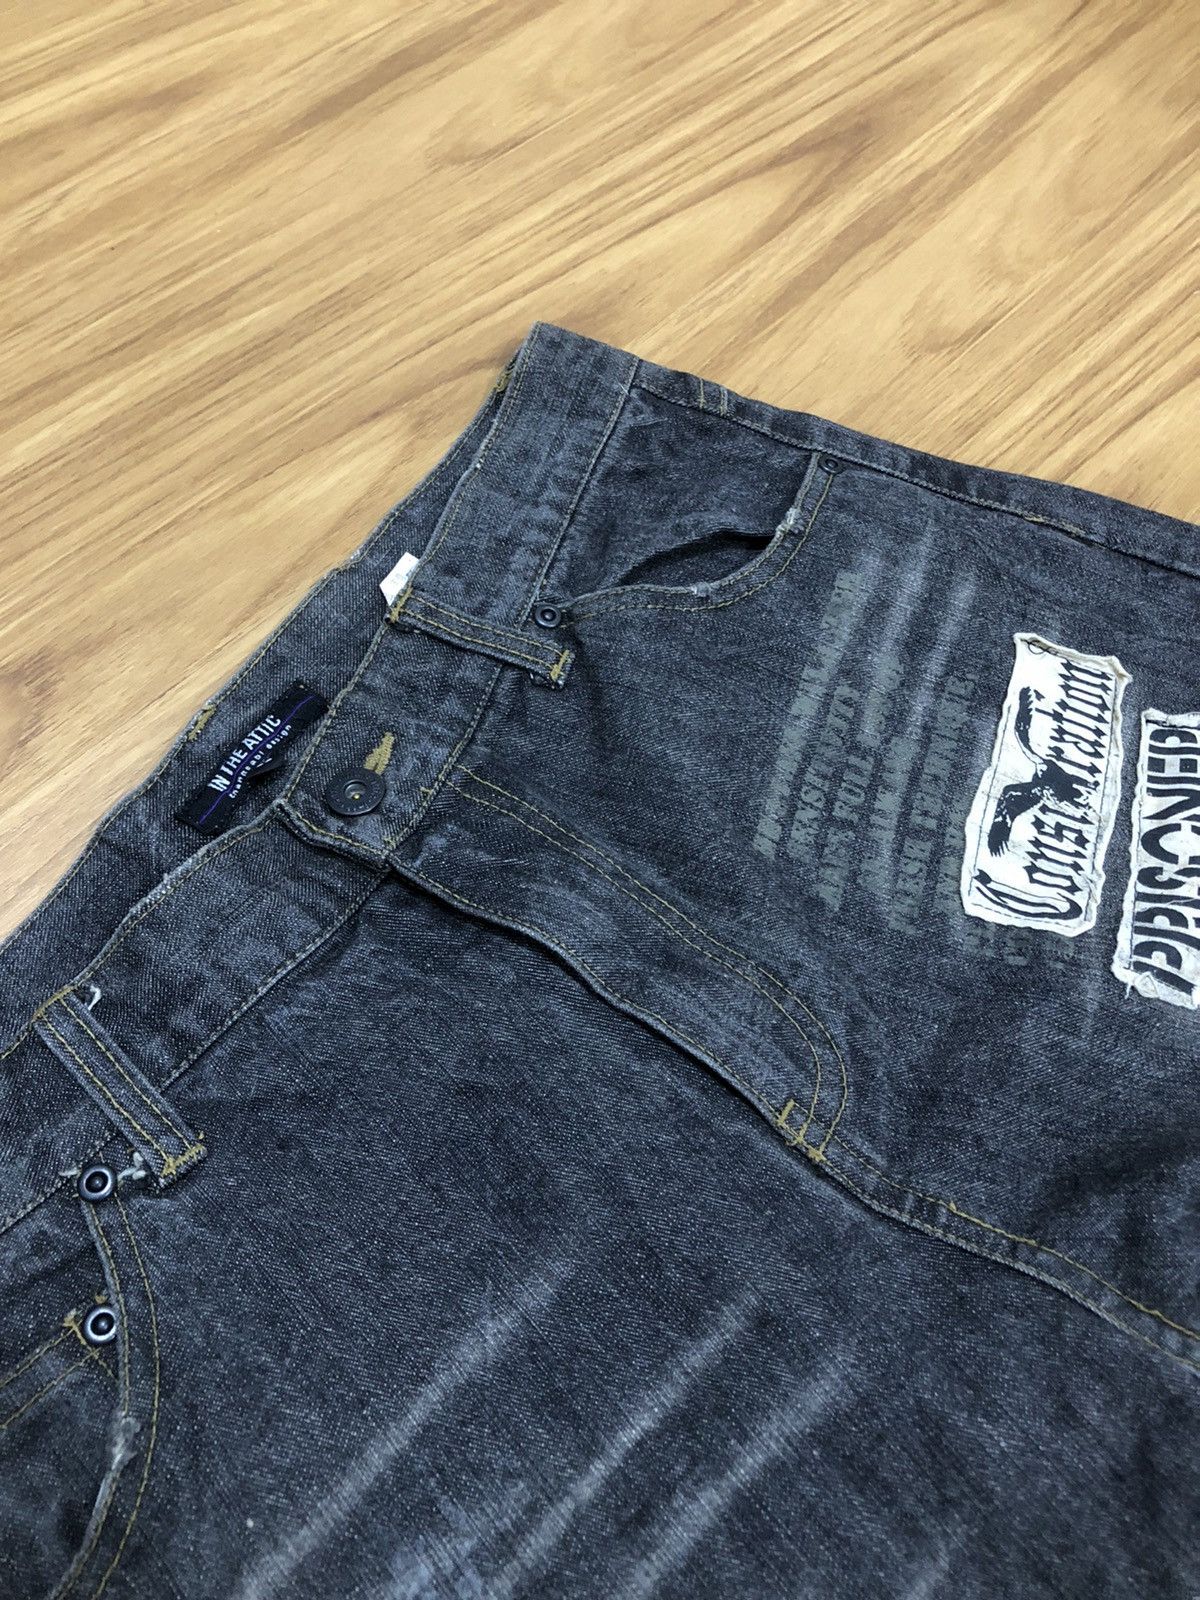 Seditionaries - 1990 - In The Attic Japanese Distressed Patches Denim Pant - 6